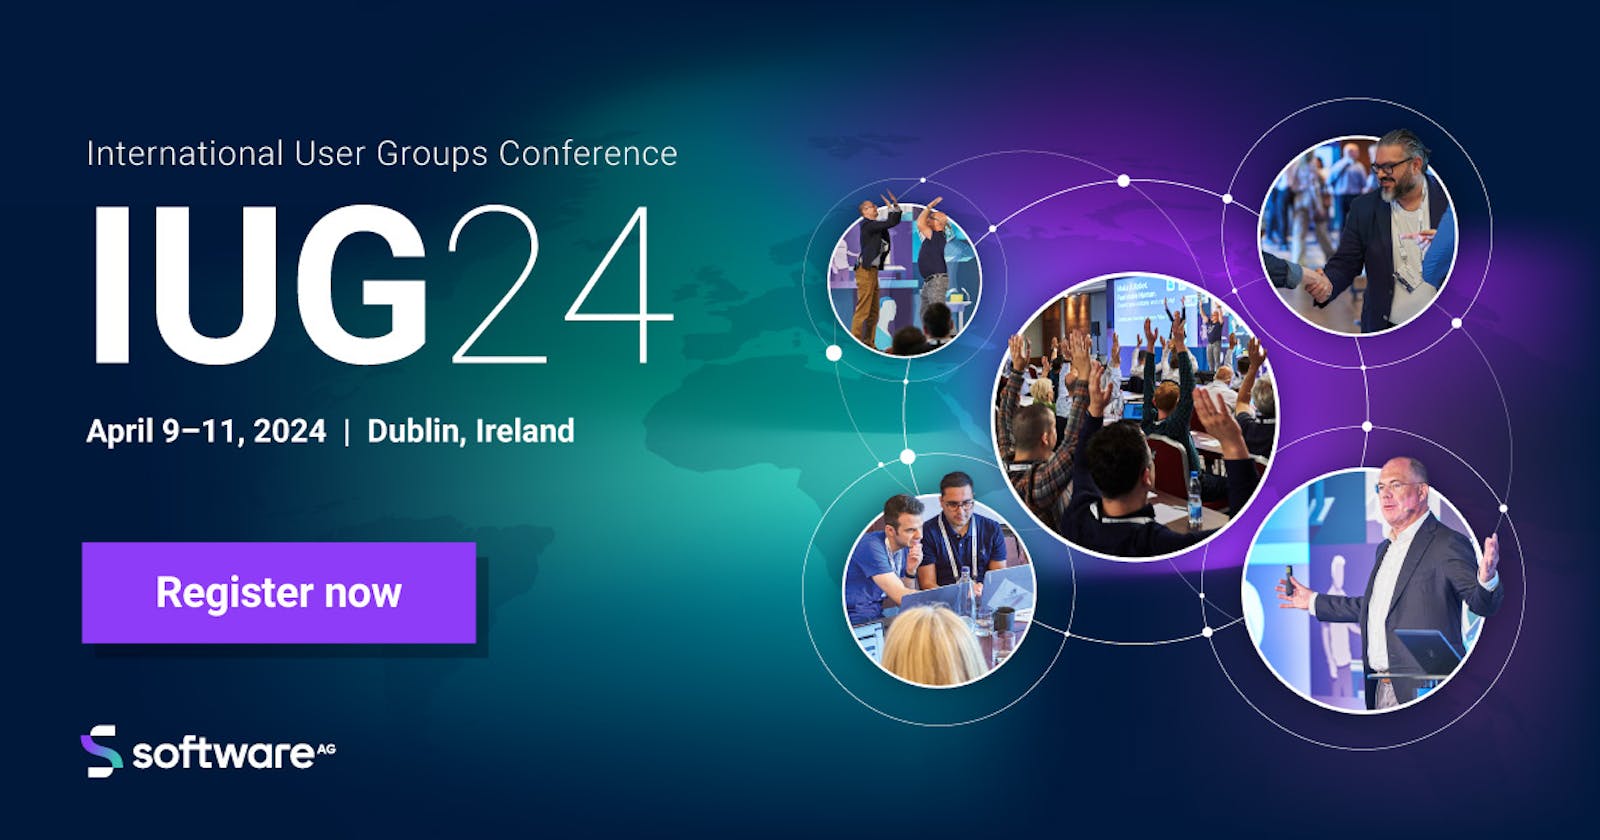 Last Chance to Register! Join us at the International User Groups Conference in Dublin!